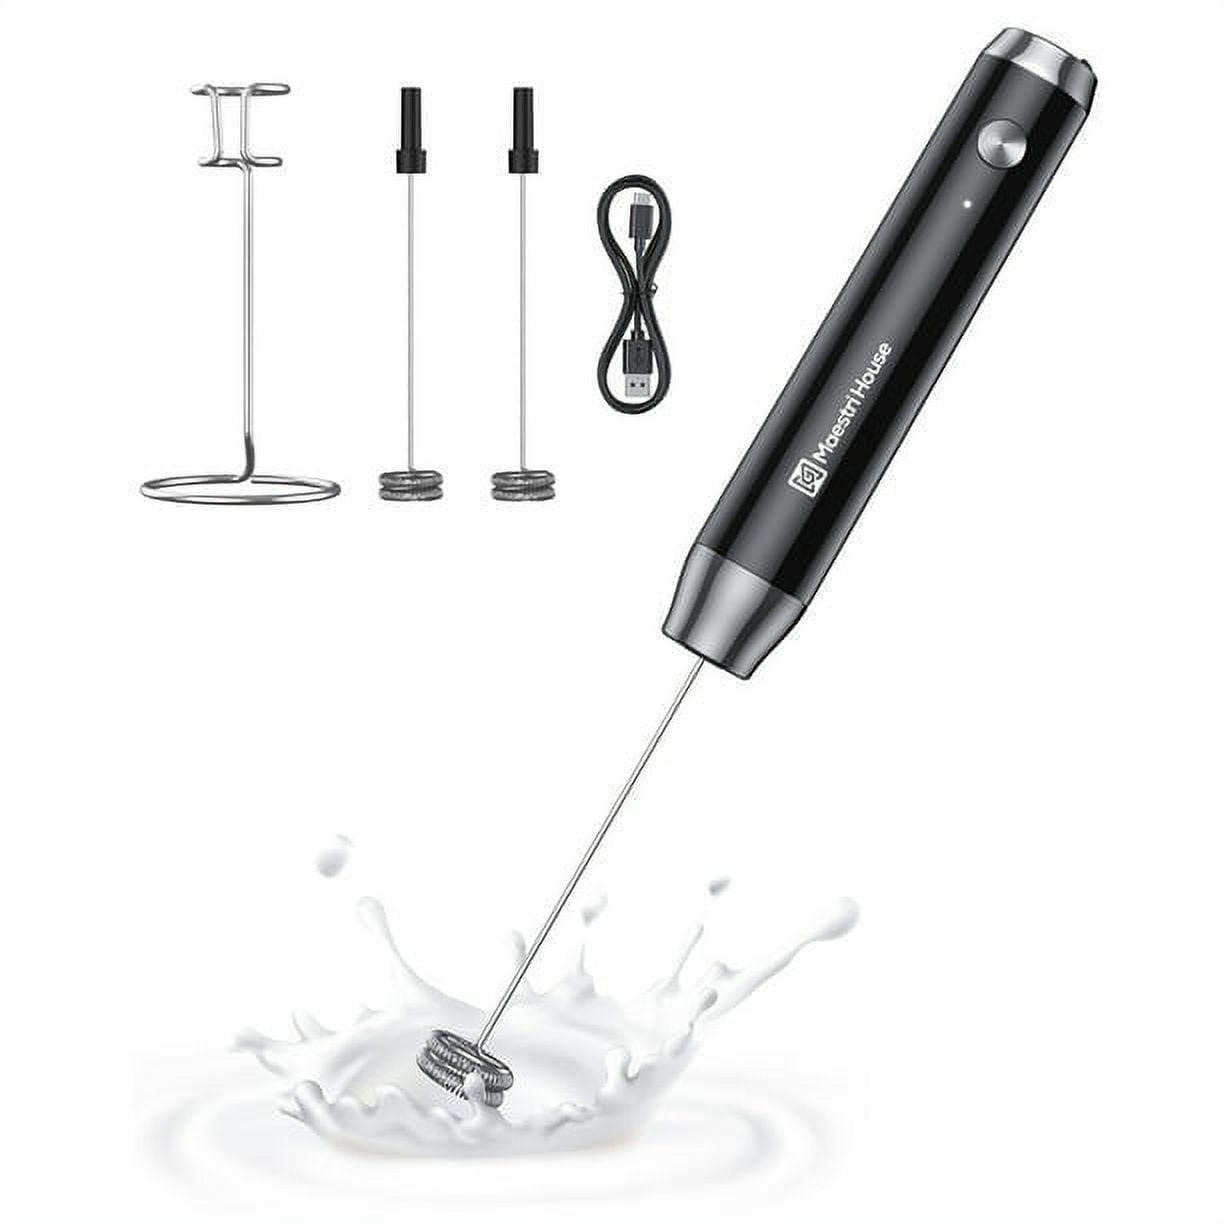 Shop LC Red Portable Electric Milk Frother Foam Double Spring Whisk Head with Handle, Size: 1.96 x 1.49 x 8.46